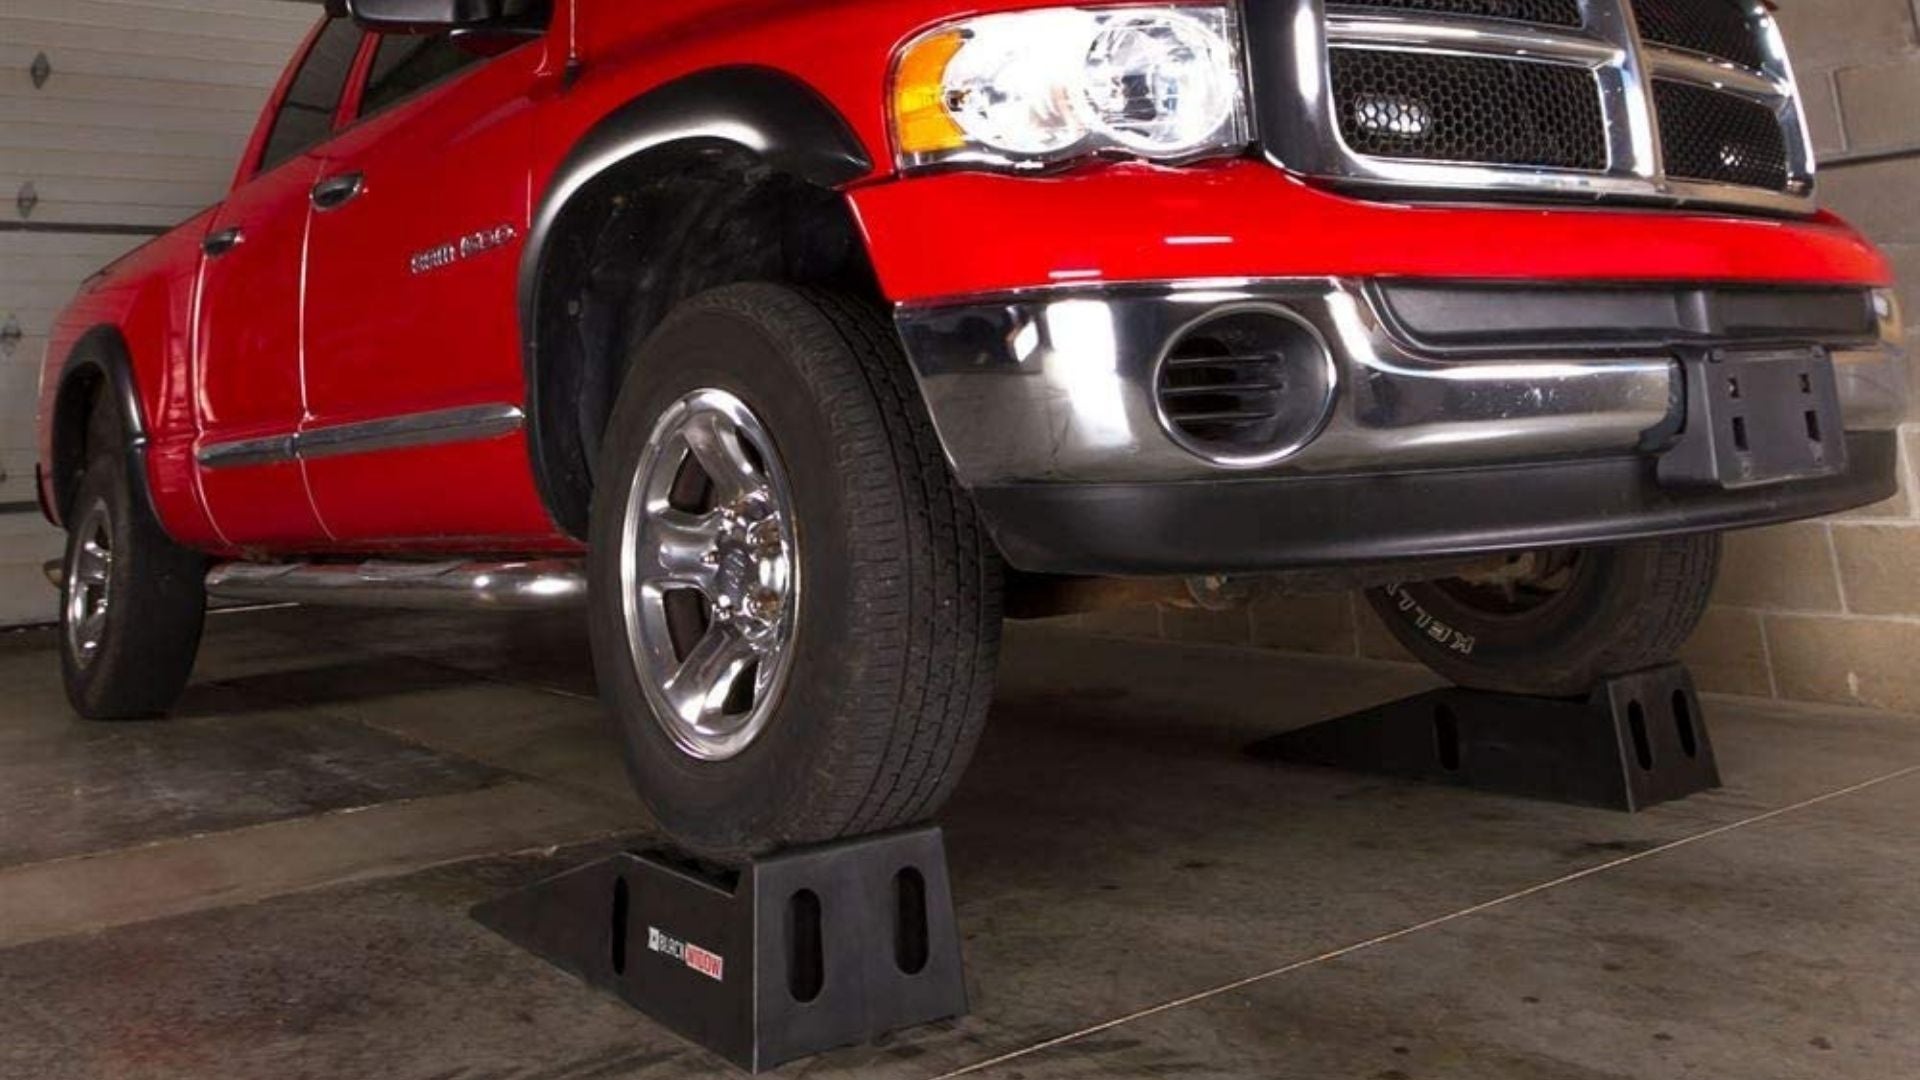 Cusco Jack Assist Ramp Set for Lowered Vehicles Cars Detachable Two-Piece Design 